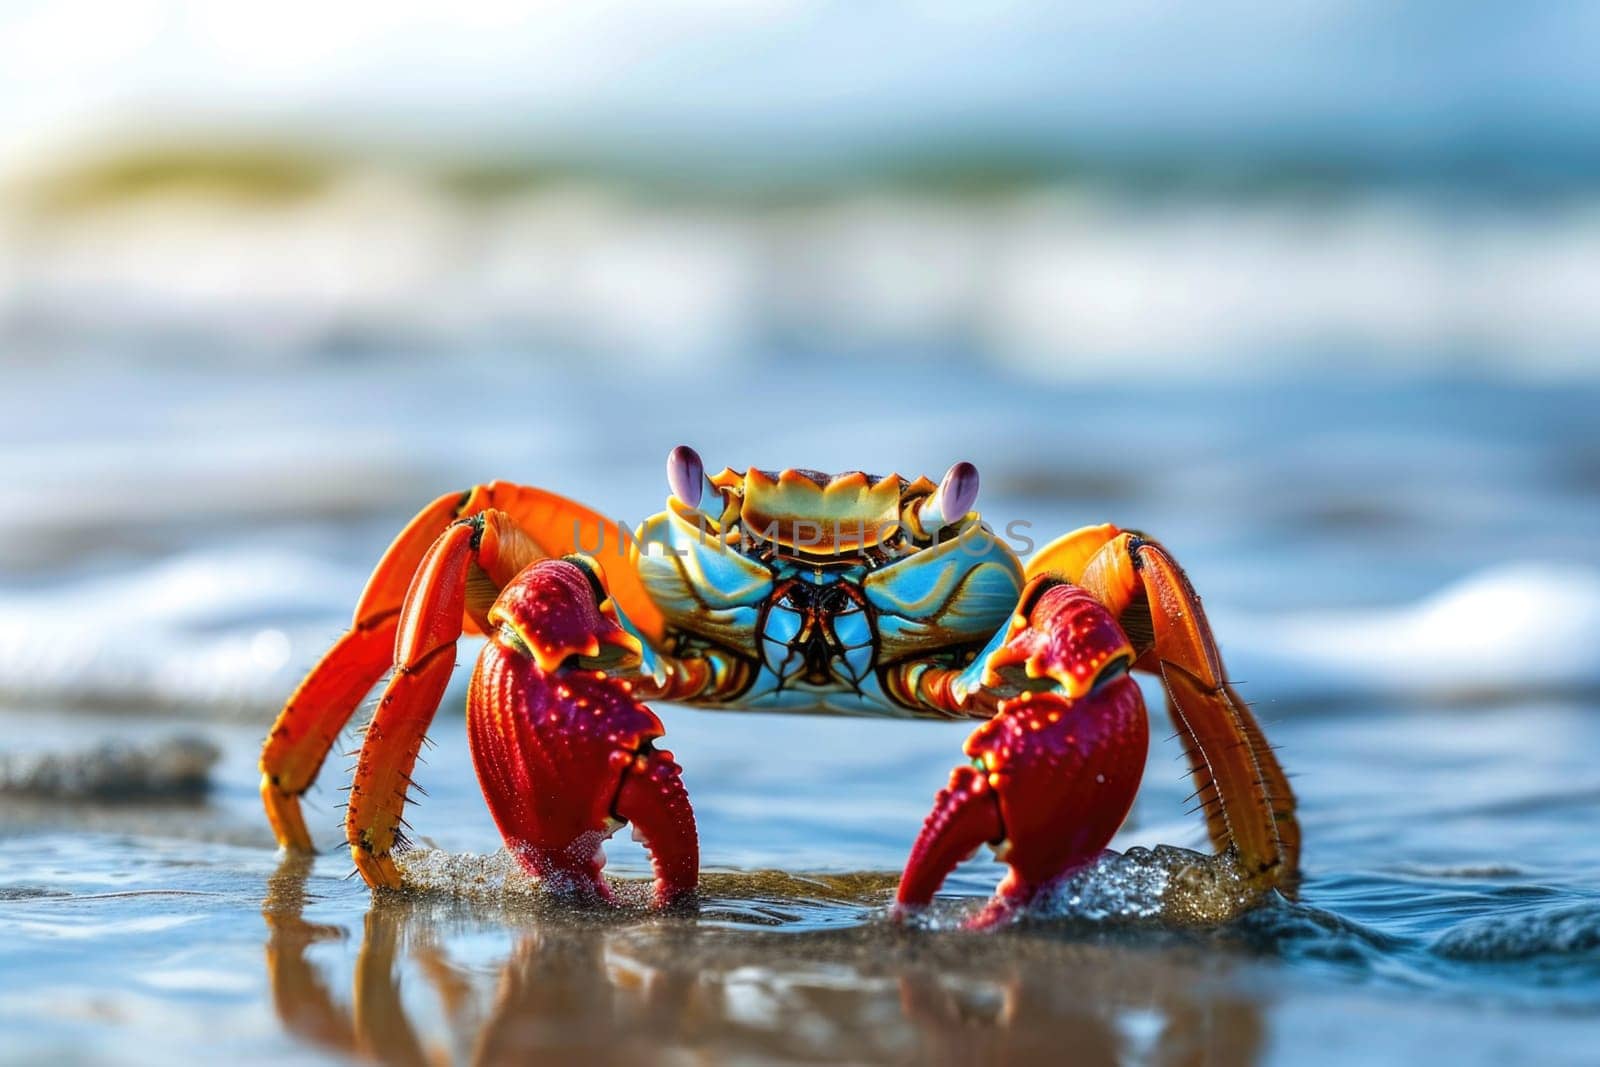 Close-up of a large crab in its natural habitat.